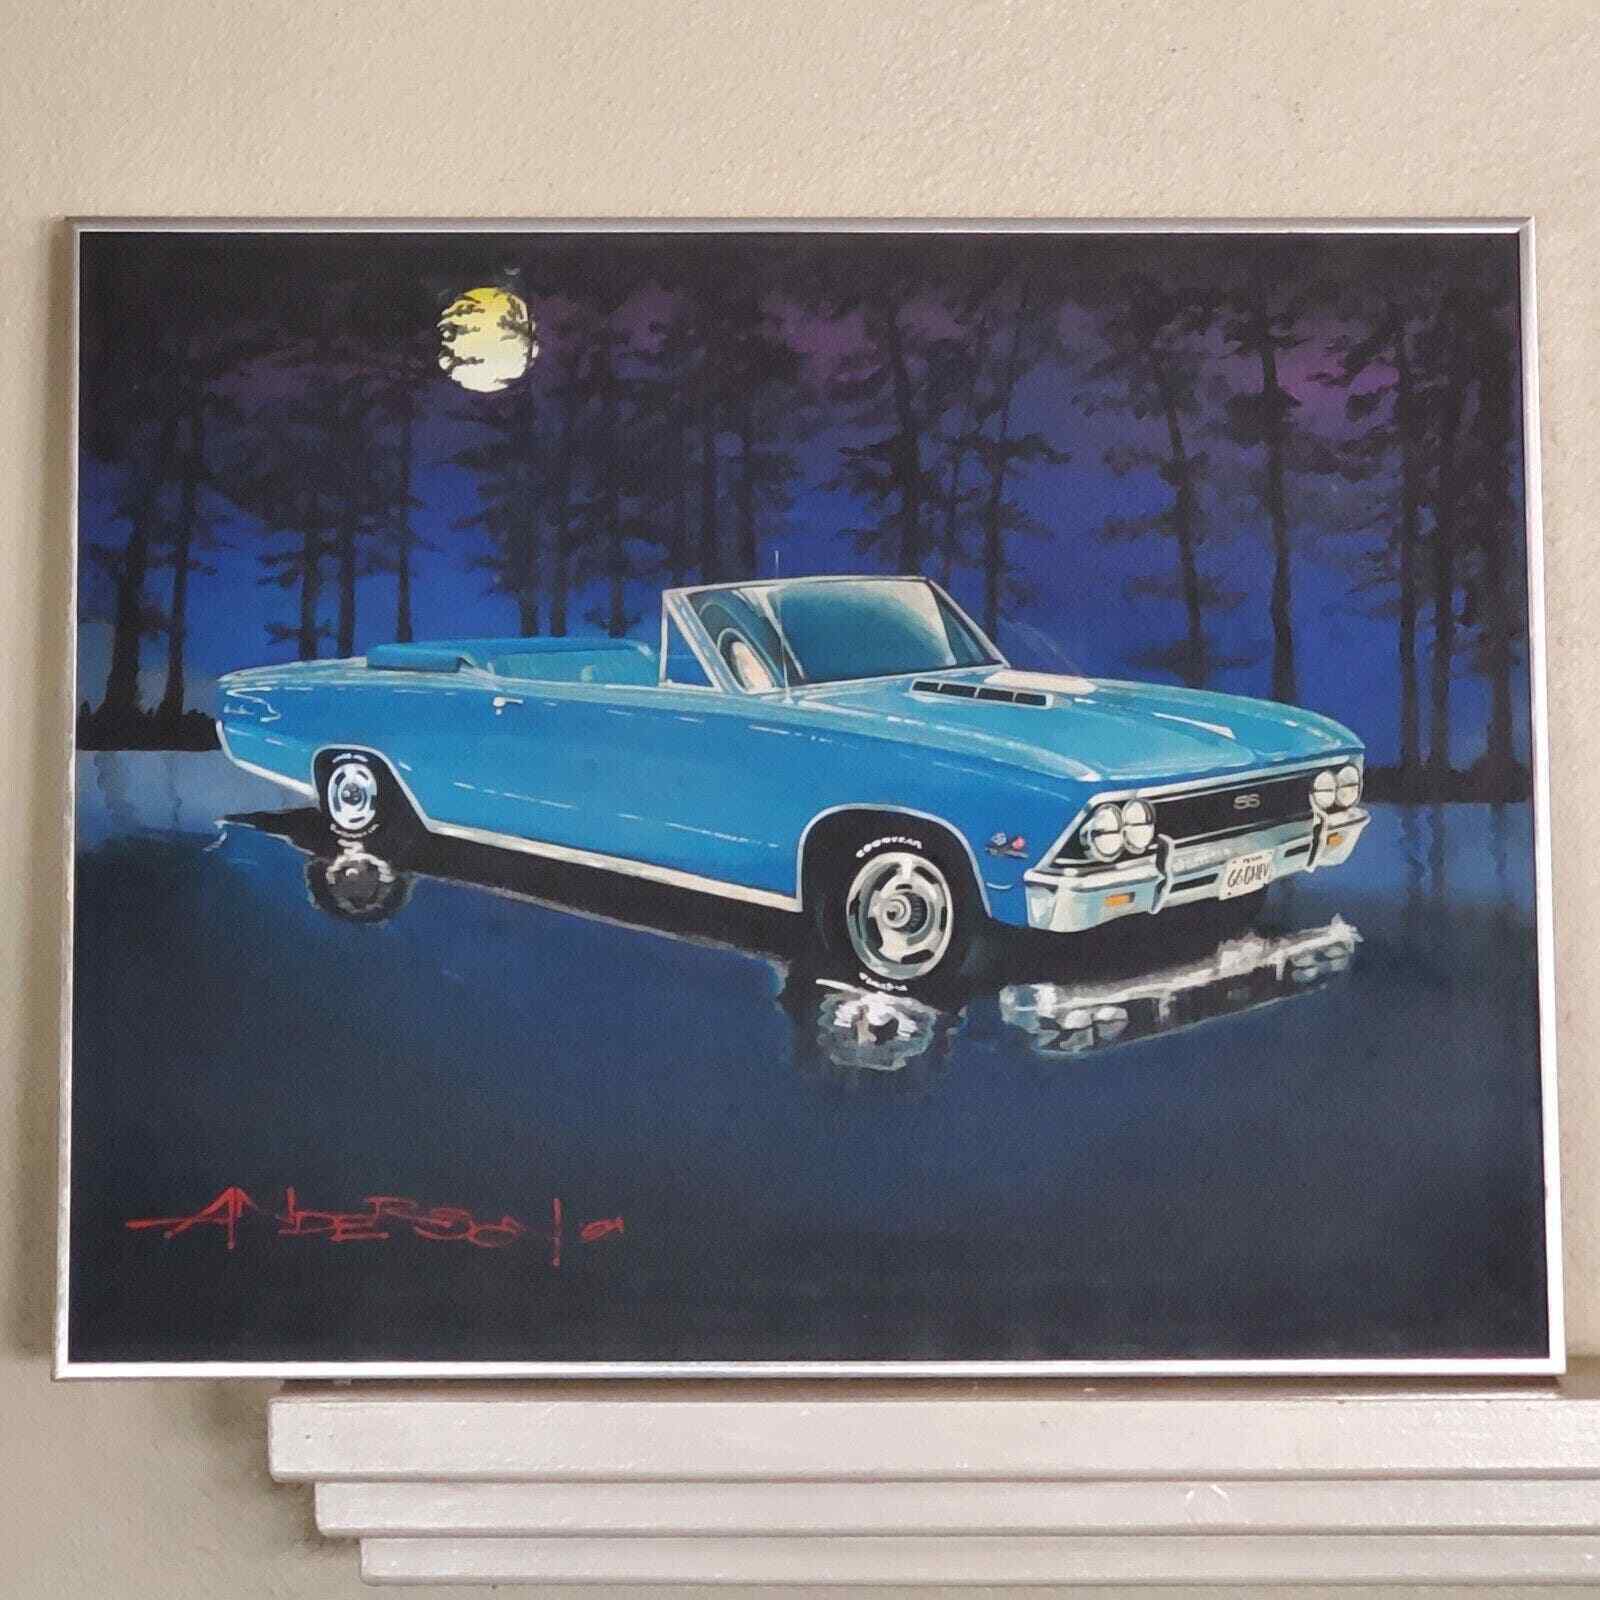 Vintage 1994 Anderson Oil Painting 1966 Chevy Convertible 28x22x1.25 Inch Framed